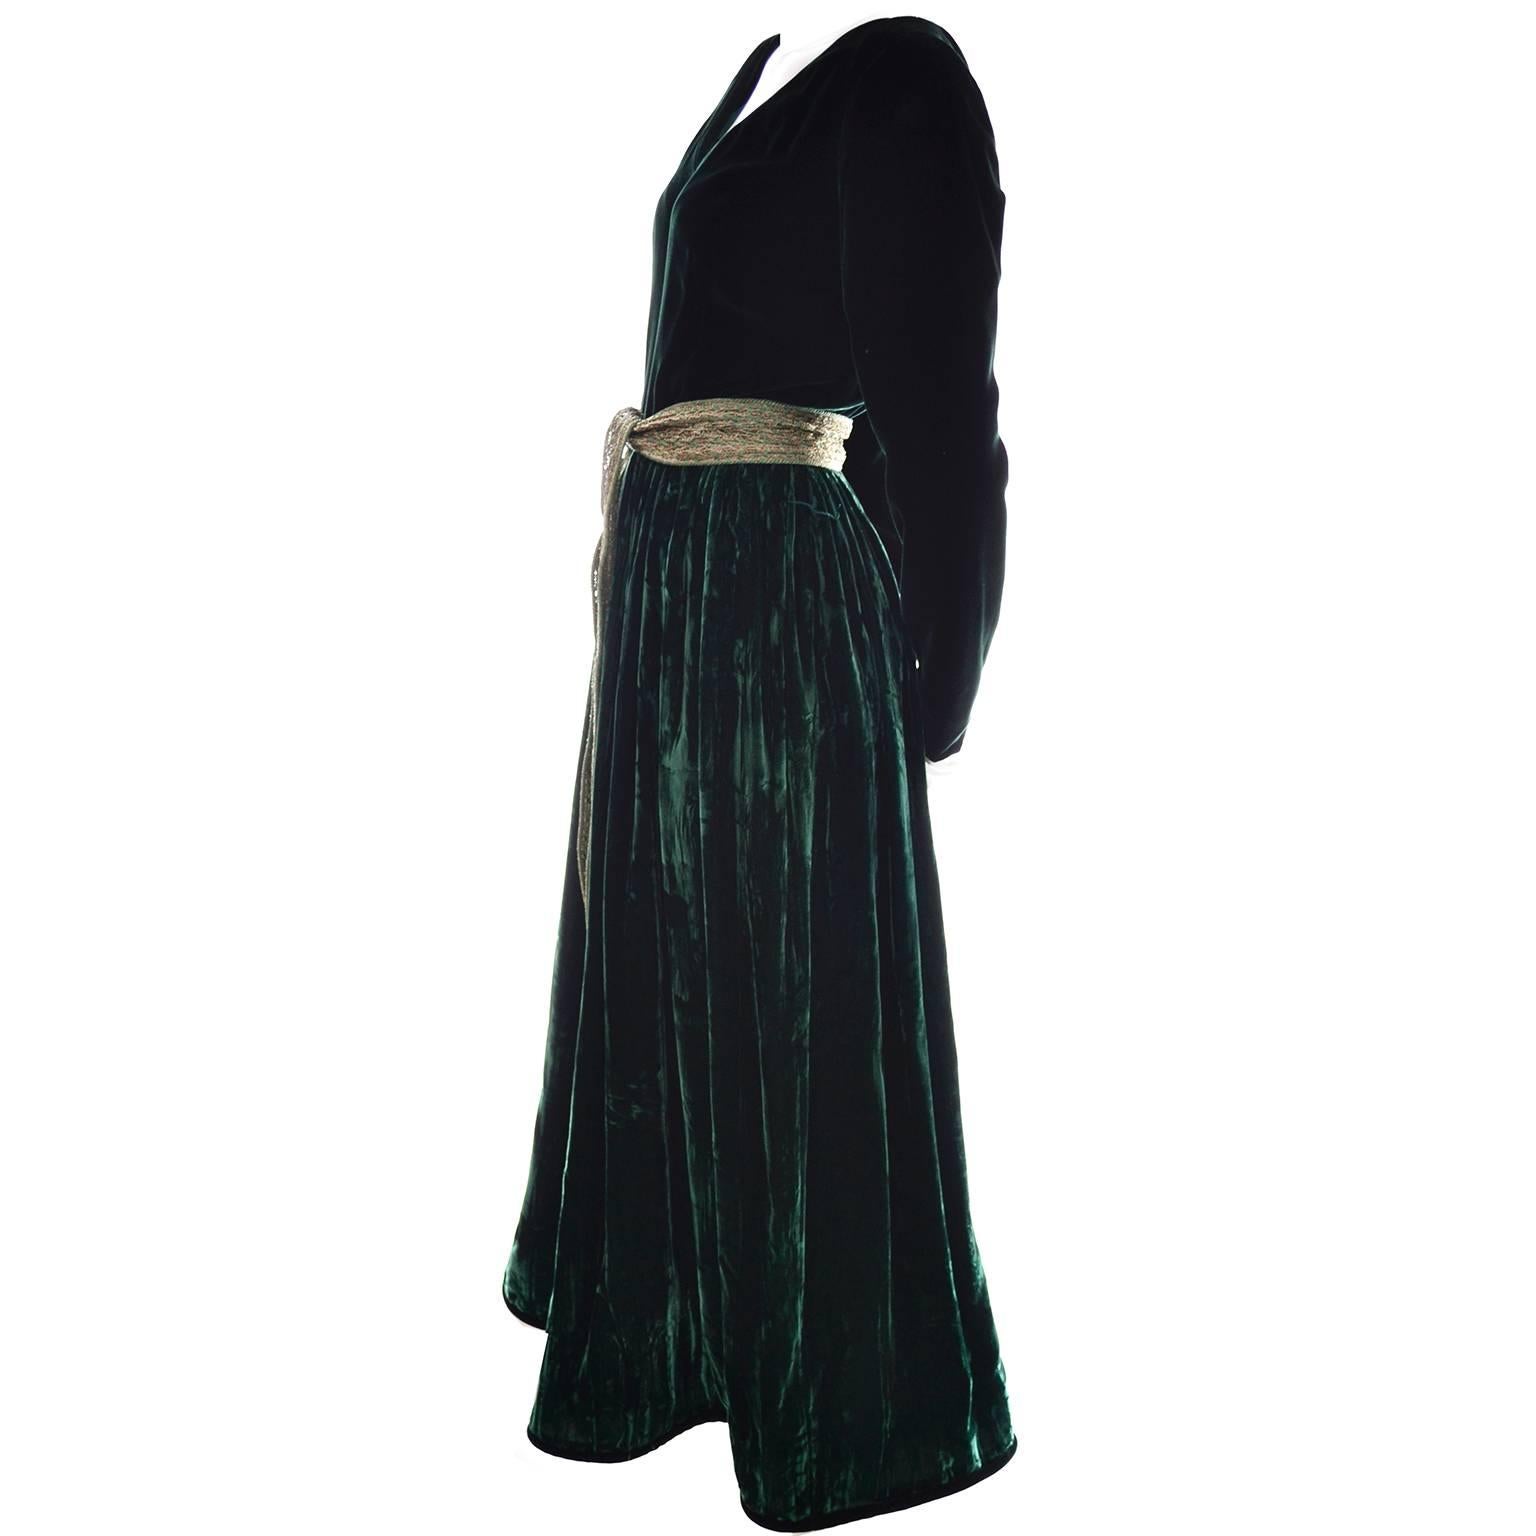 This luxurious green velvet evening gown was designed by Oscar de la Renta and has the Oscar de la Renta Studio label.  The bodice is smooth deep green velvet and the skirt is satin backed crushed green velvet with deep green trim at the hem line. 